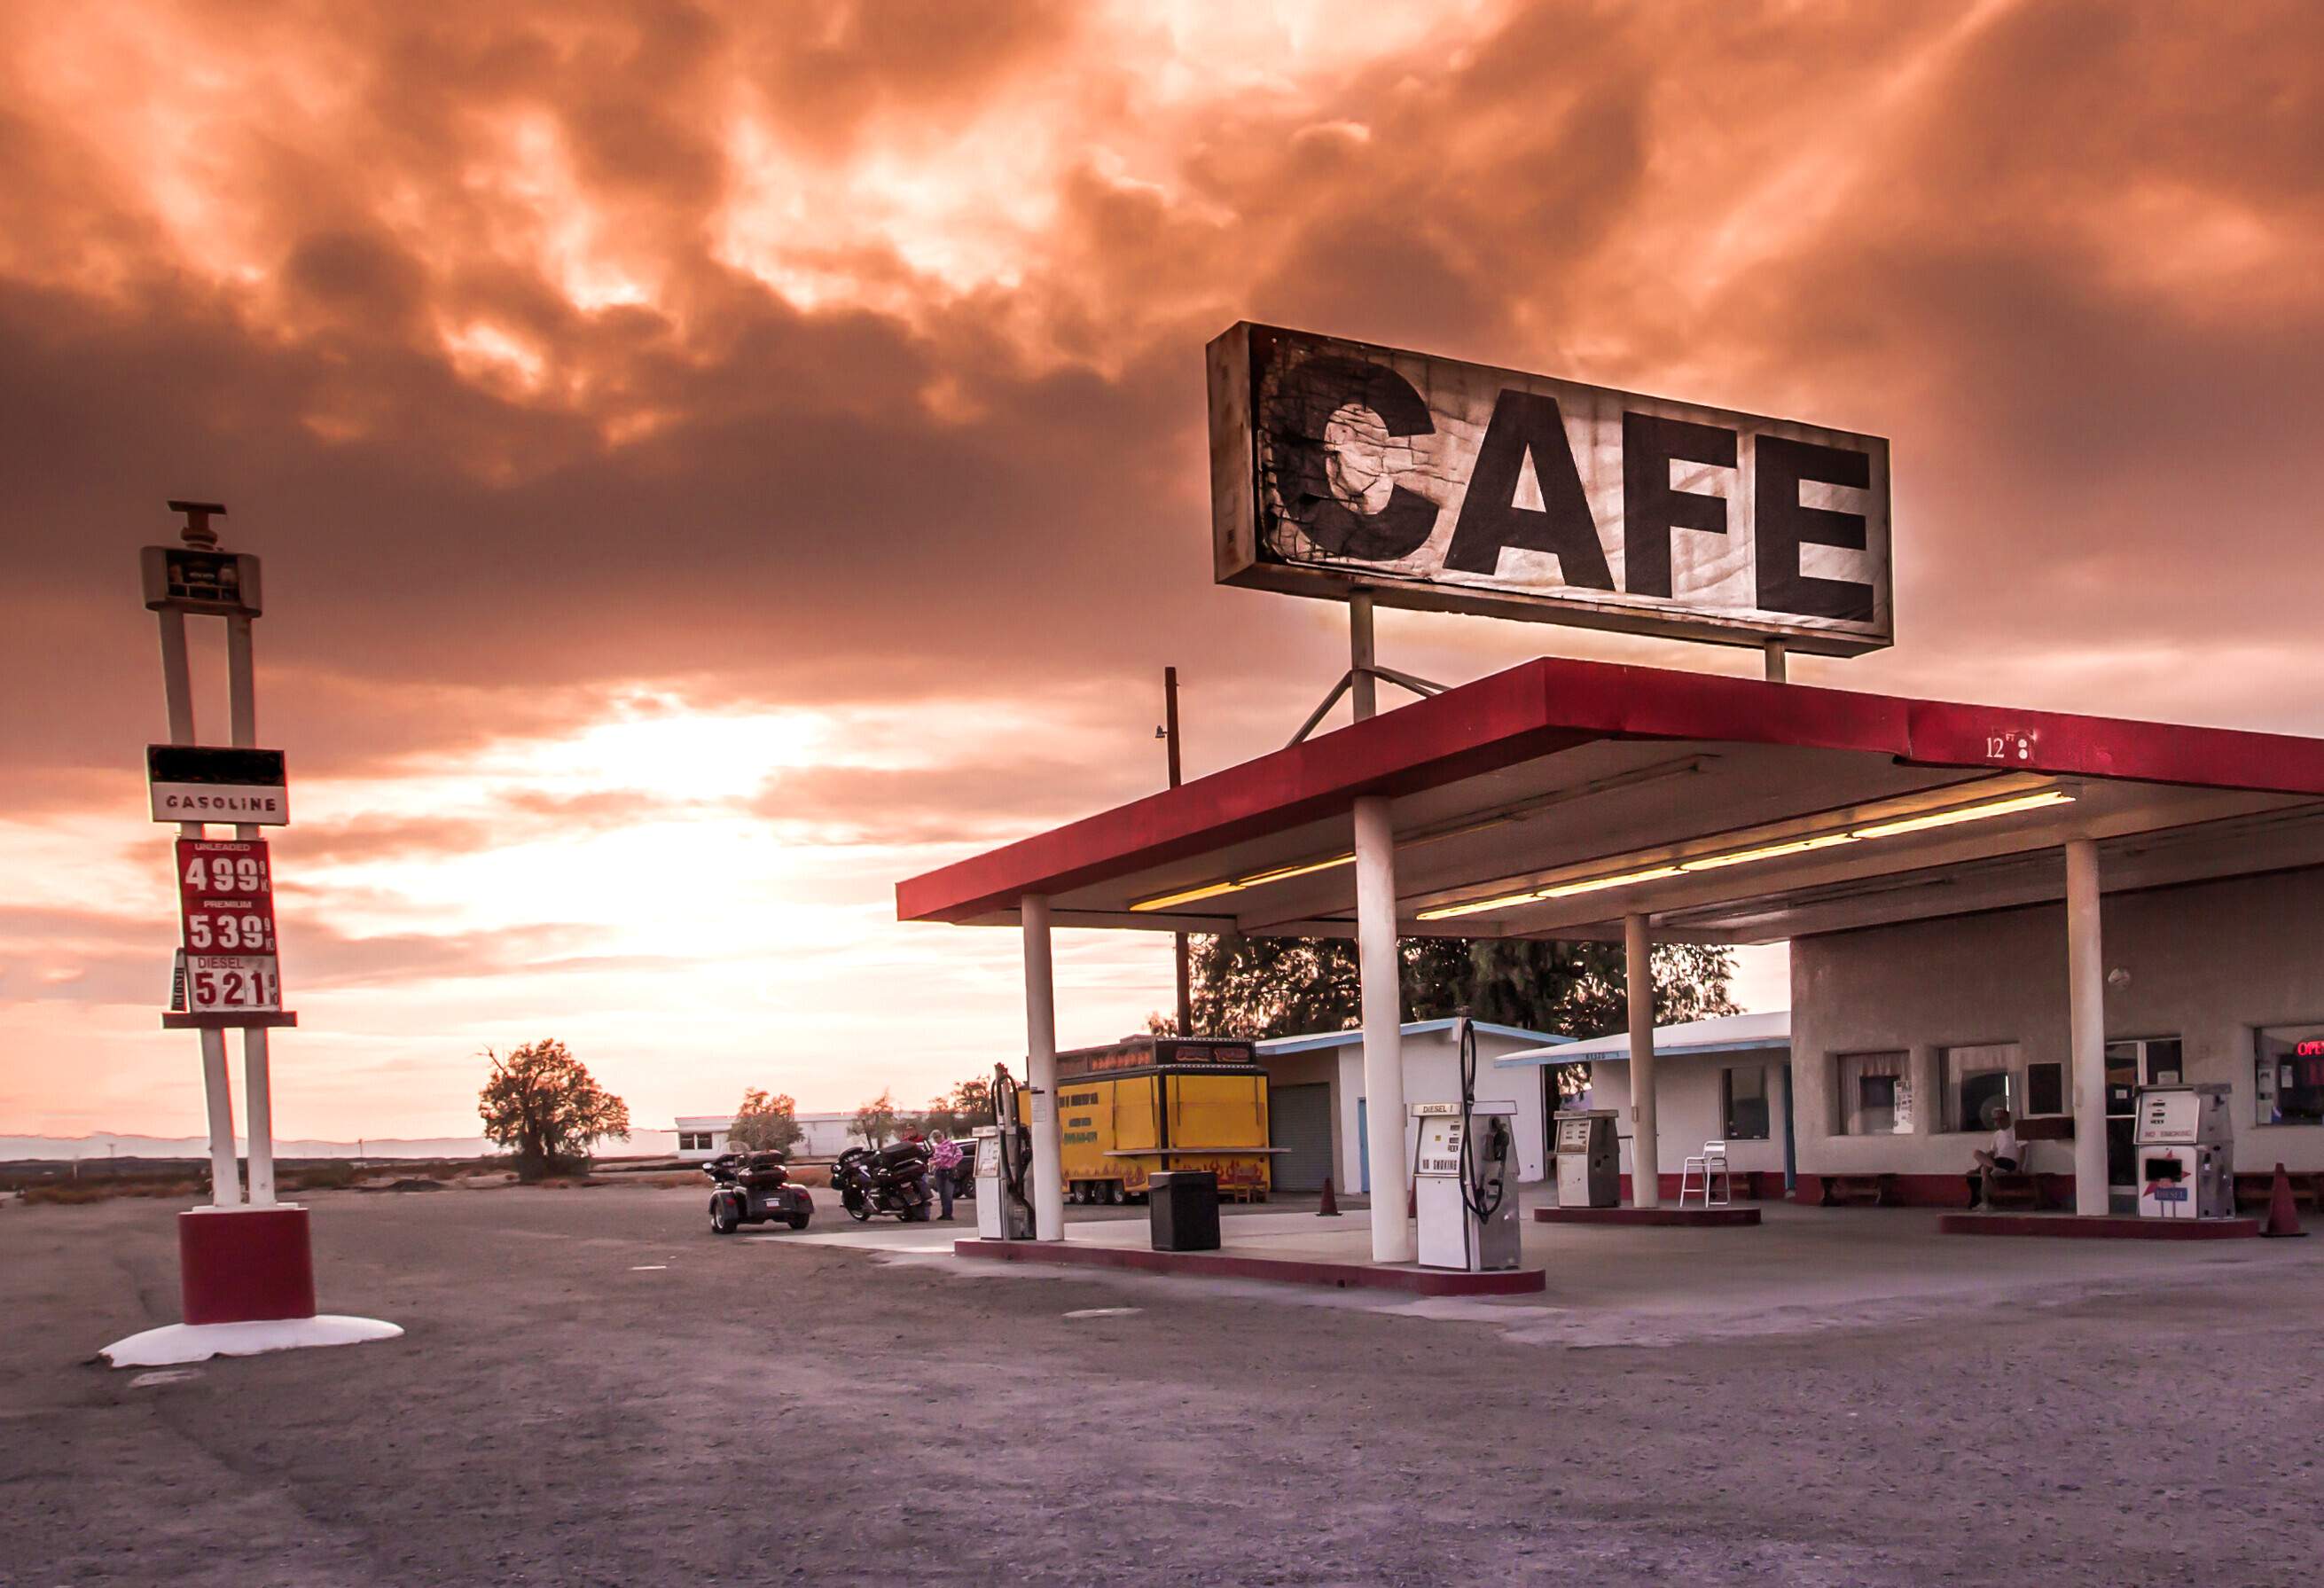 dest_usa_california_route-66_gas-station_and_cafe_gettyimages-489477808_universal_within-usage-period_62695